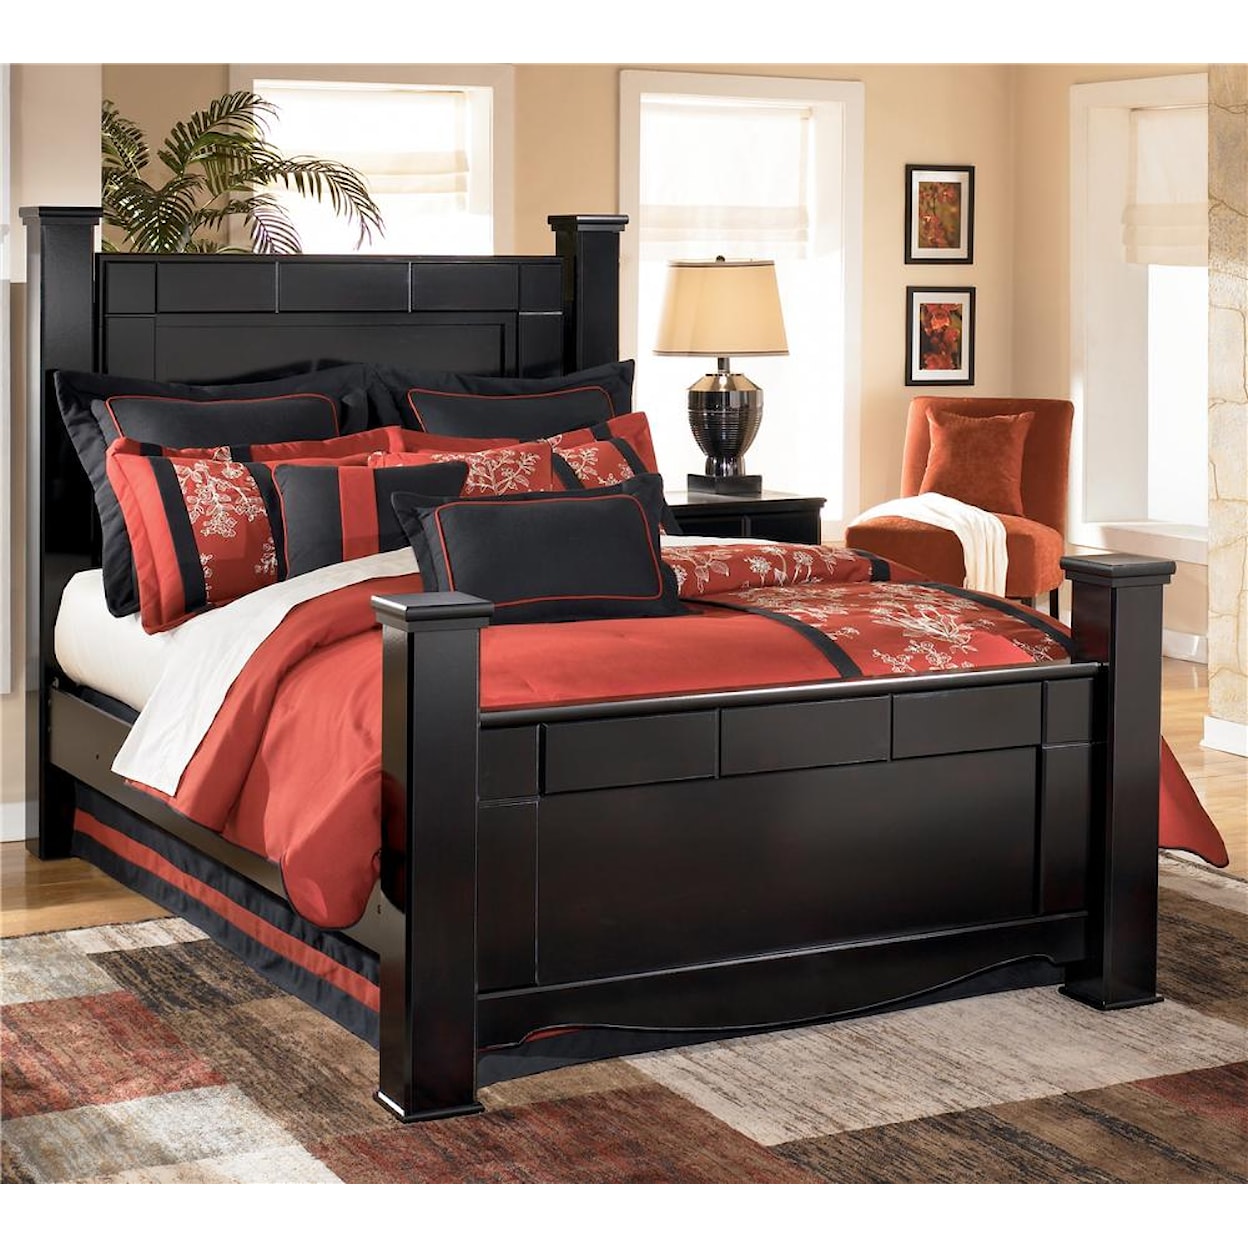 Ashley Furniture Signature Design Shay B271 Queen Poster Bed